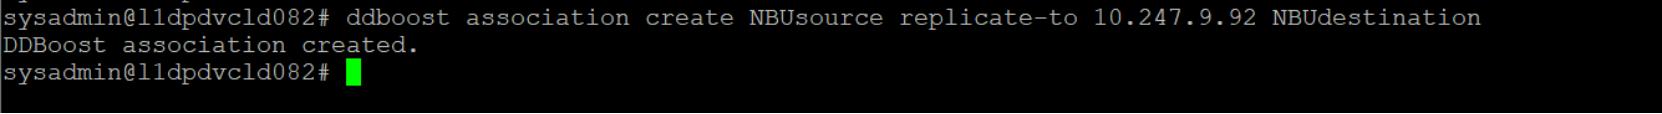 The image shows the command line option to associate the source and destination storage units